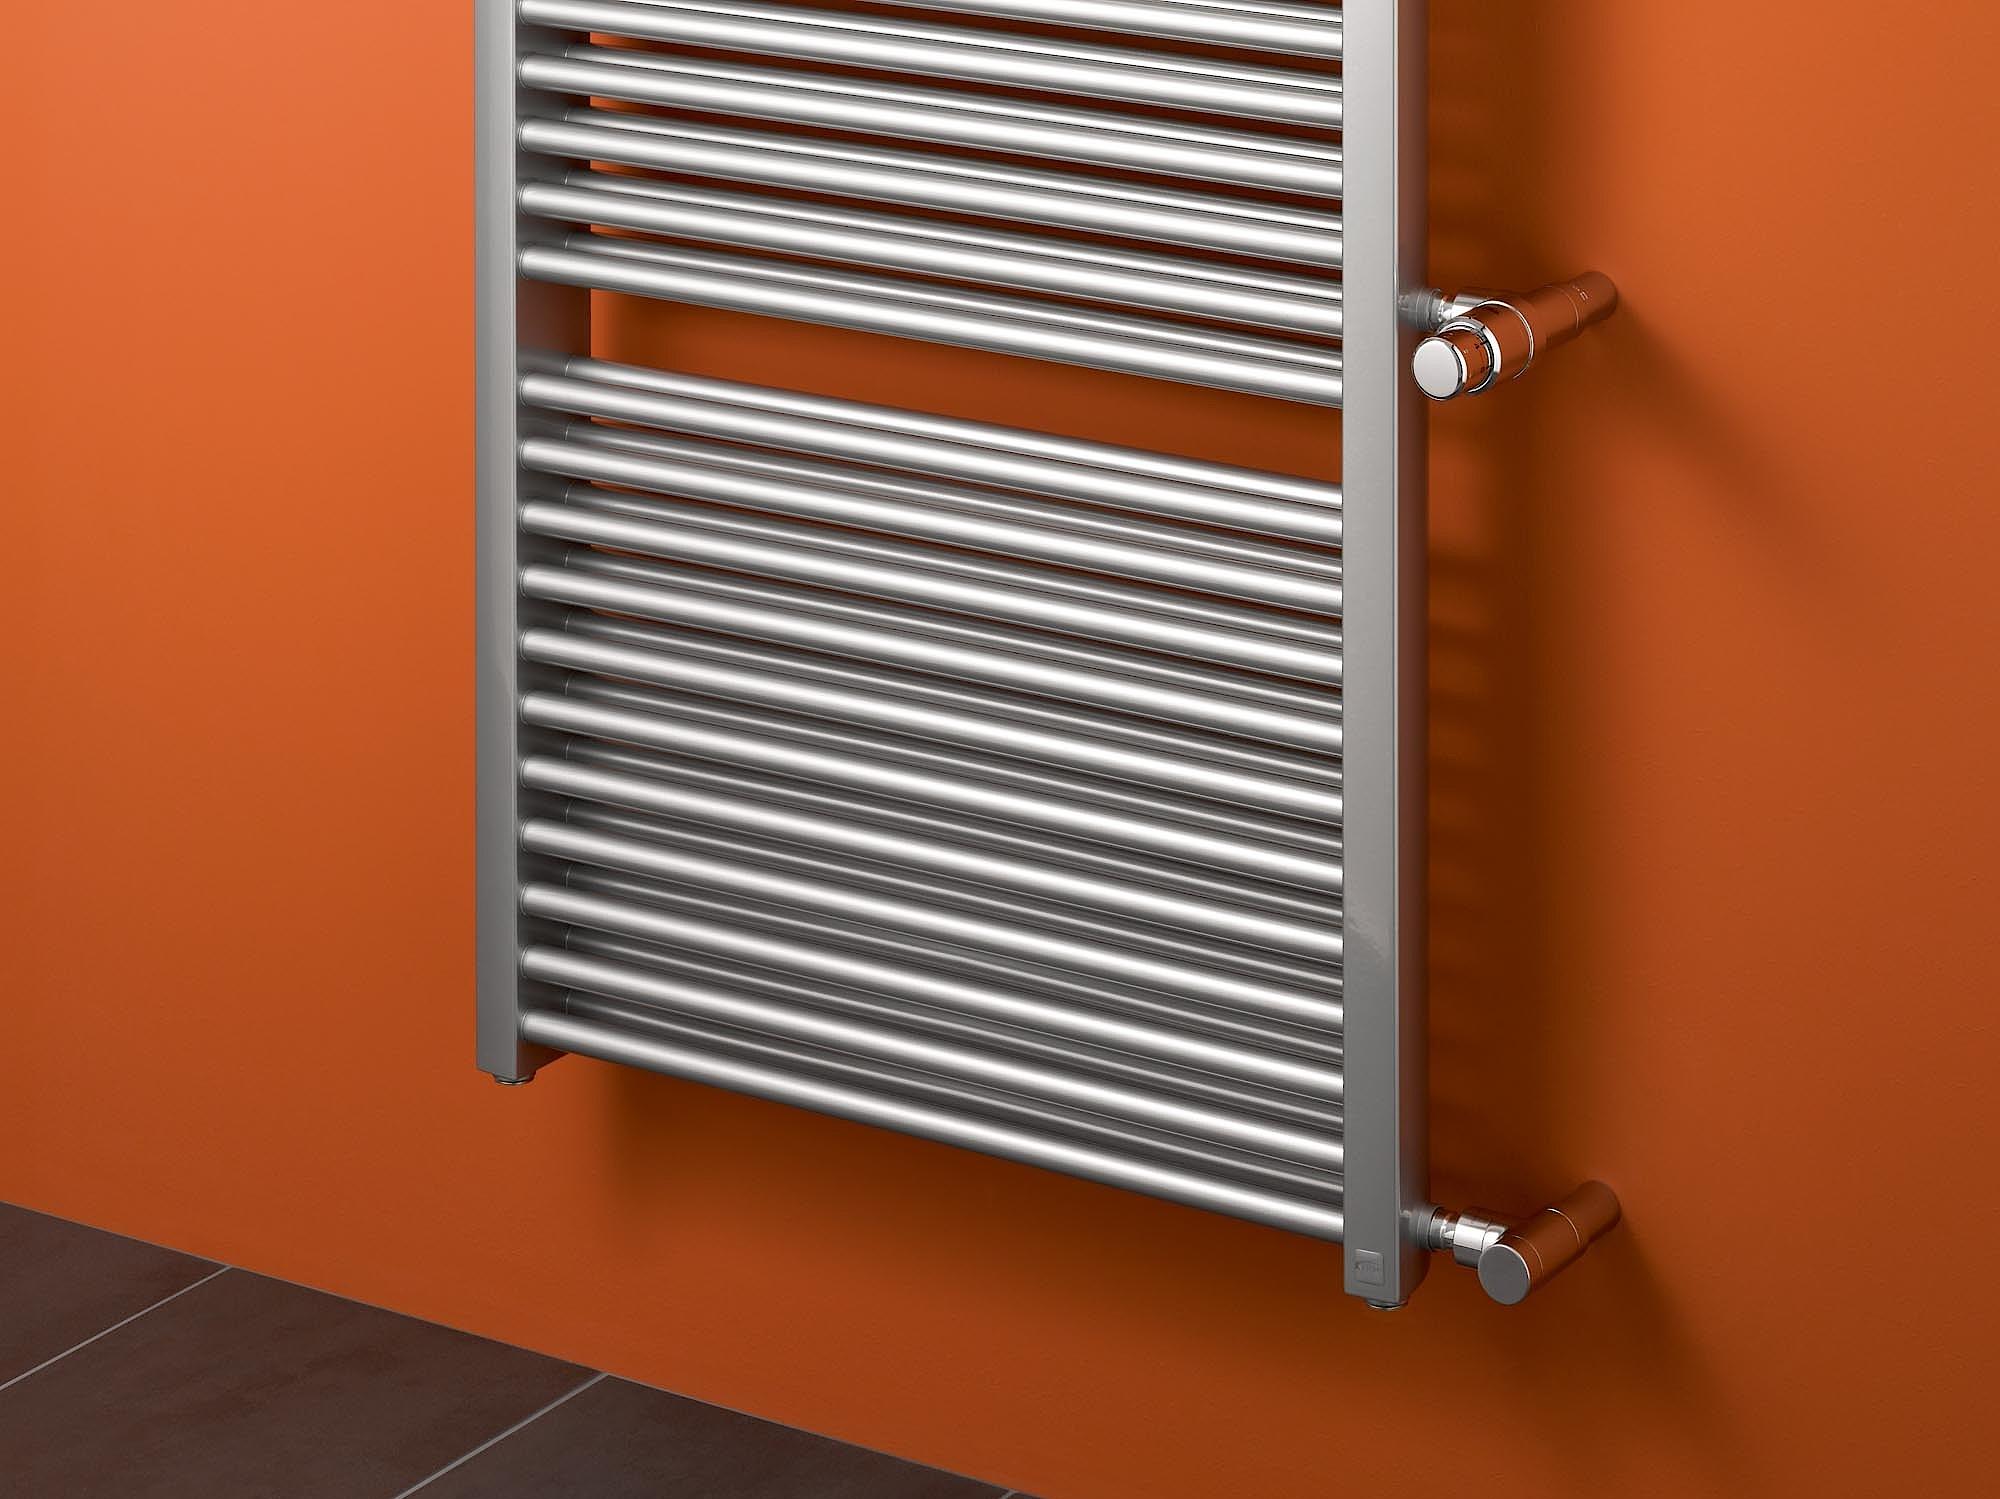 The Kermi Duett design and bathroom radiator offers a fast and efficient replacement solution for modernisation projects.